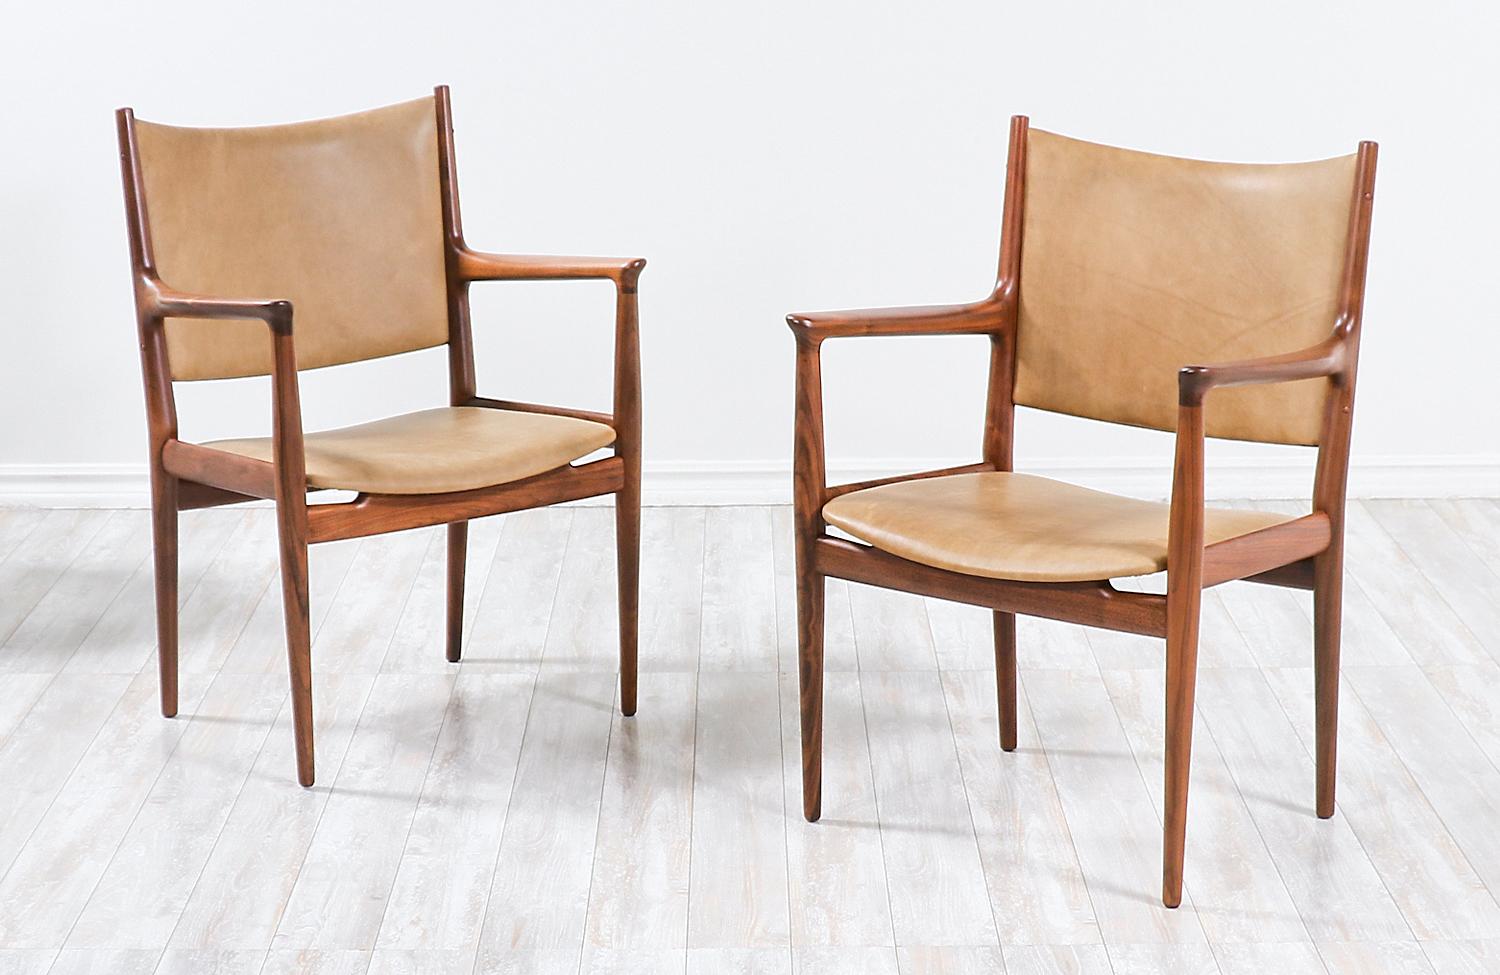 Pair of models JH-509 armchairs designed by iconic Danish architect Hans J. Wegner in collaboration with the famous workshop of Johannes Hansen in Denmark during the 1950s. Initially designed for conference and meeting rooms, these ergonomic chairs